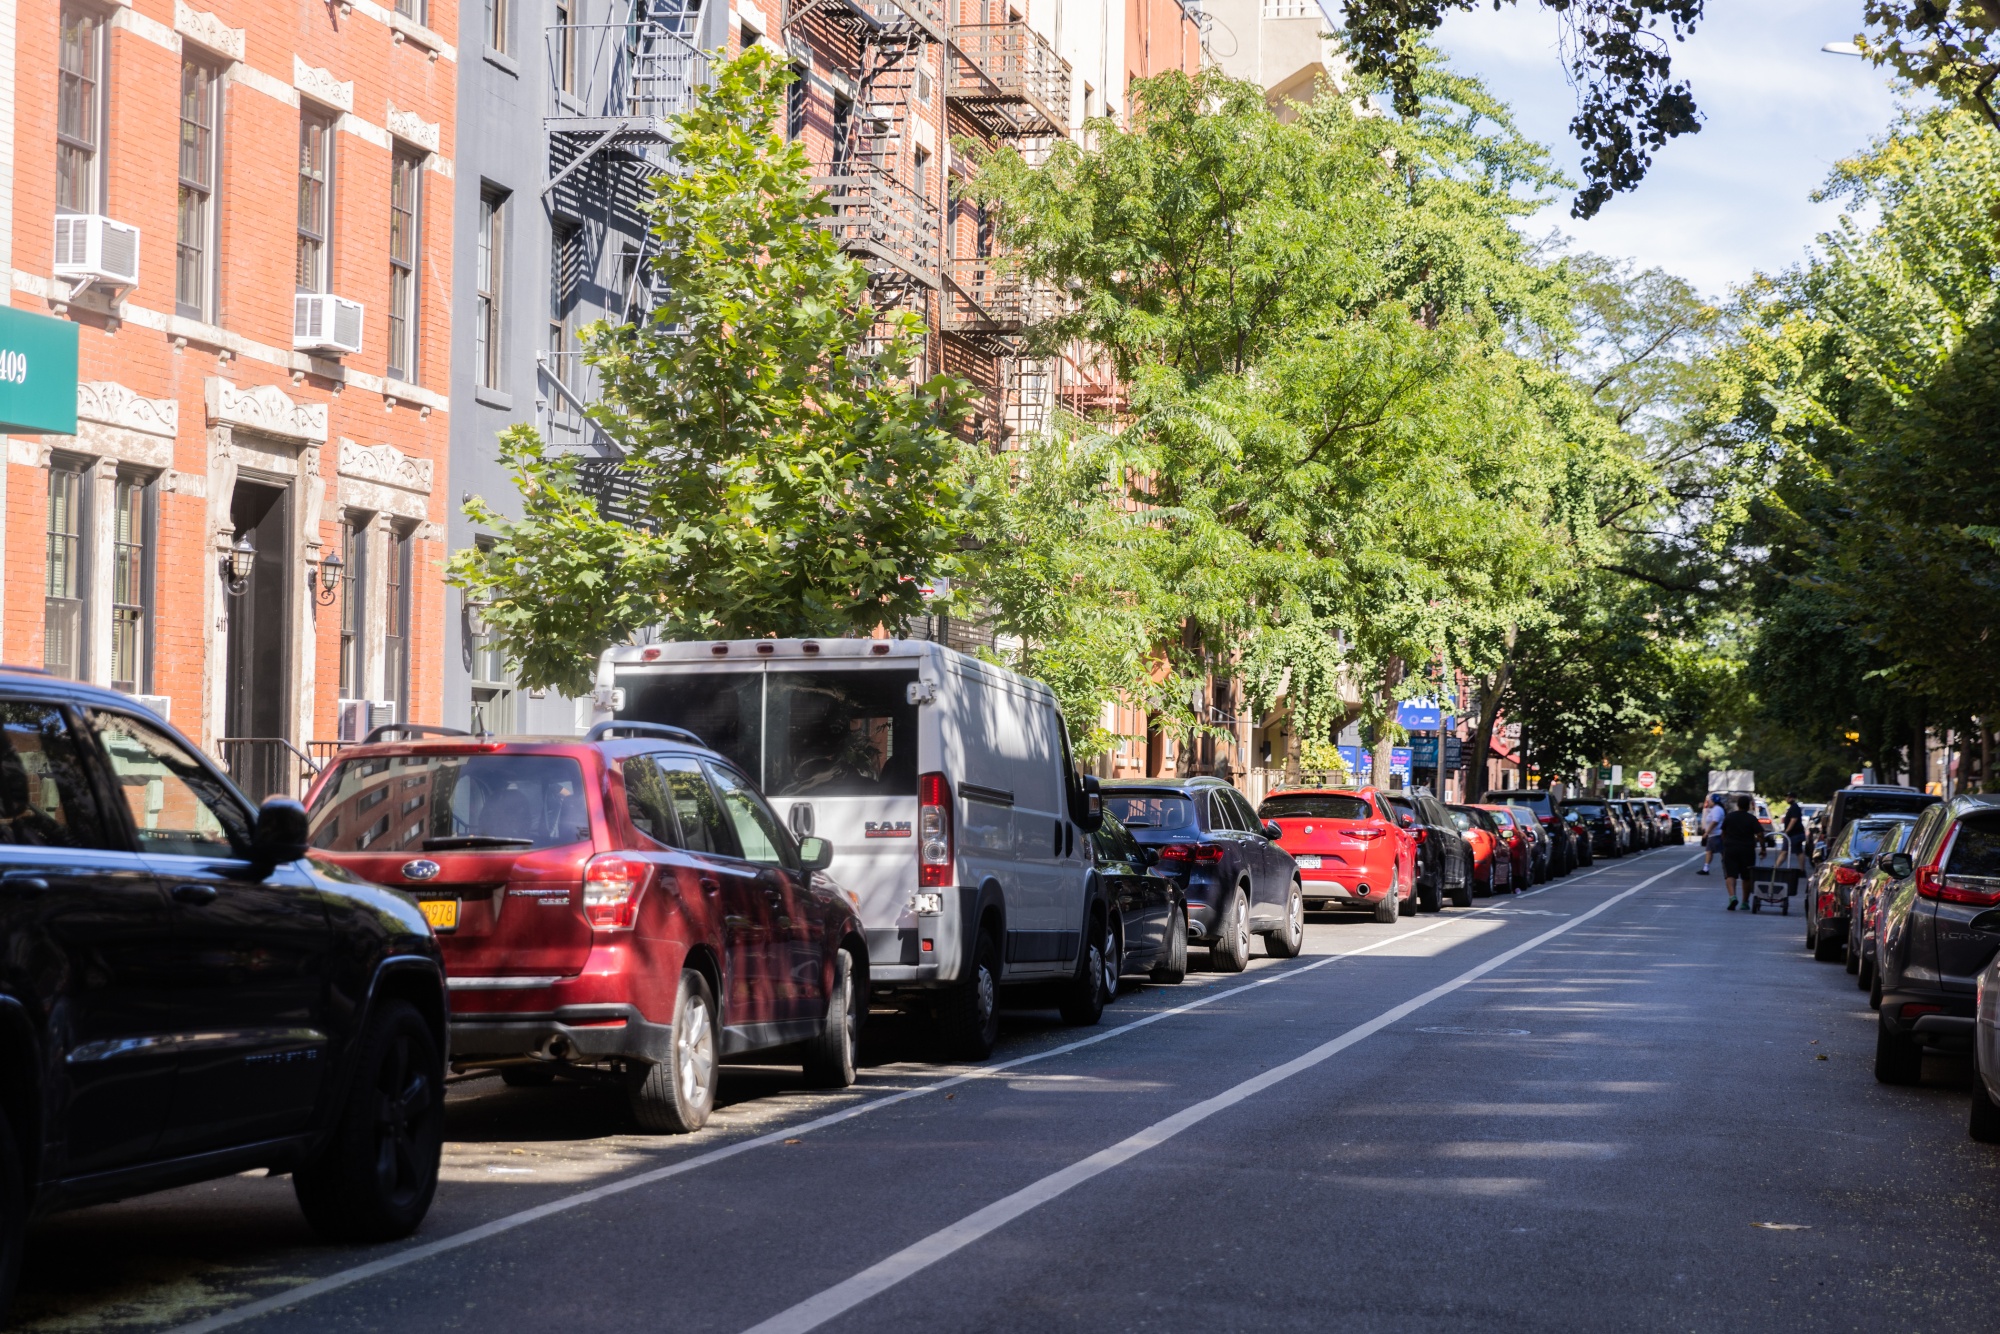 NYC's Parking 'Nightmare' Deepens With 224% Increase in New Cars - Bloomberg